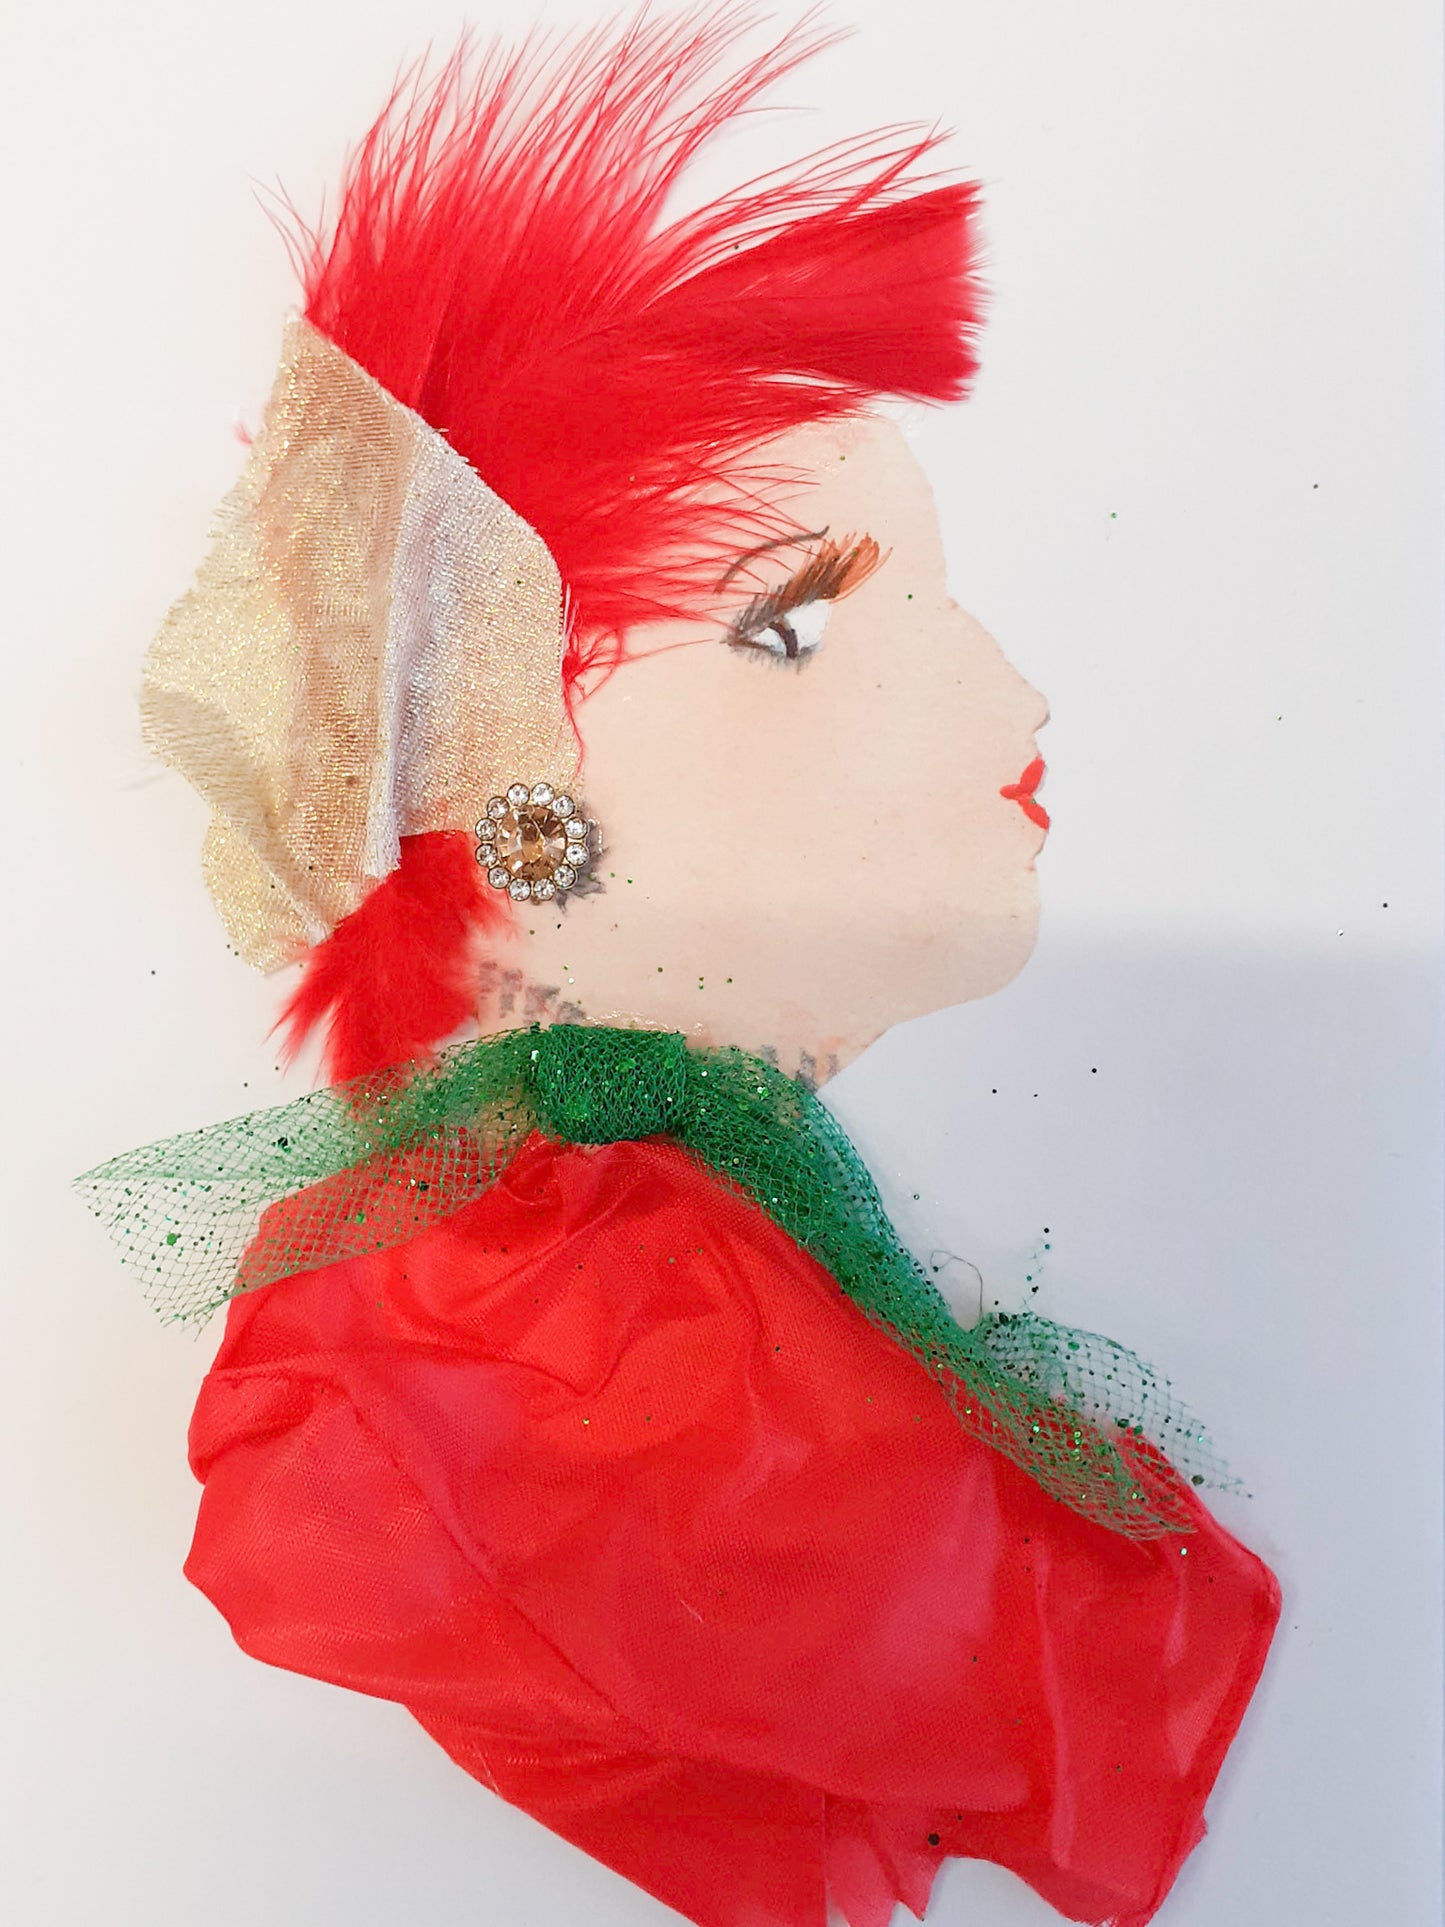 She wears a red silk dress with a green chiffon bow, and her hair is feathery and red with a gold silk scarf in it 